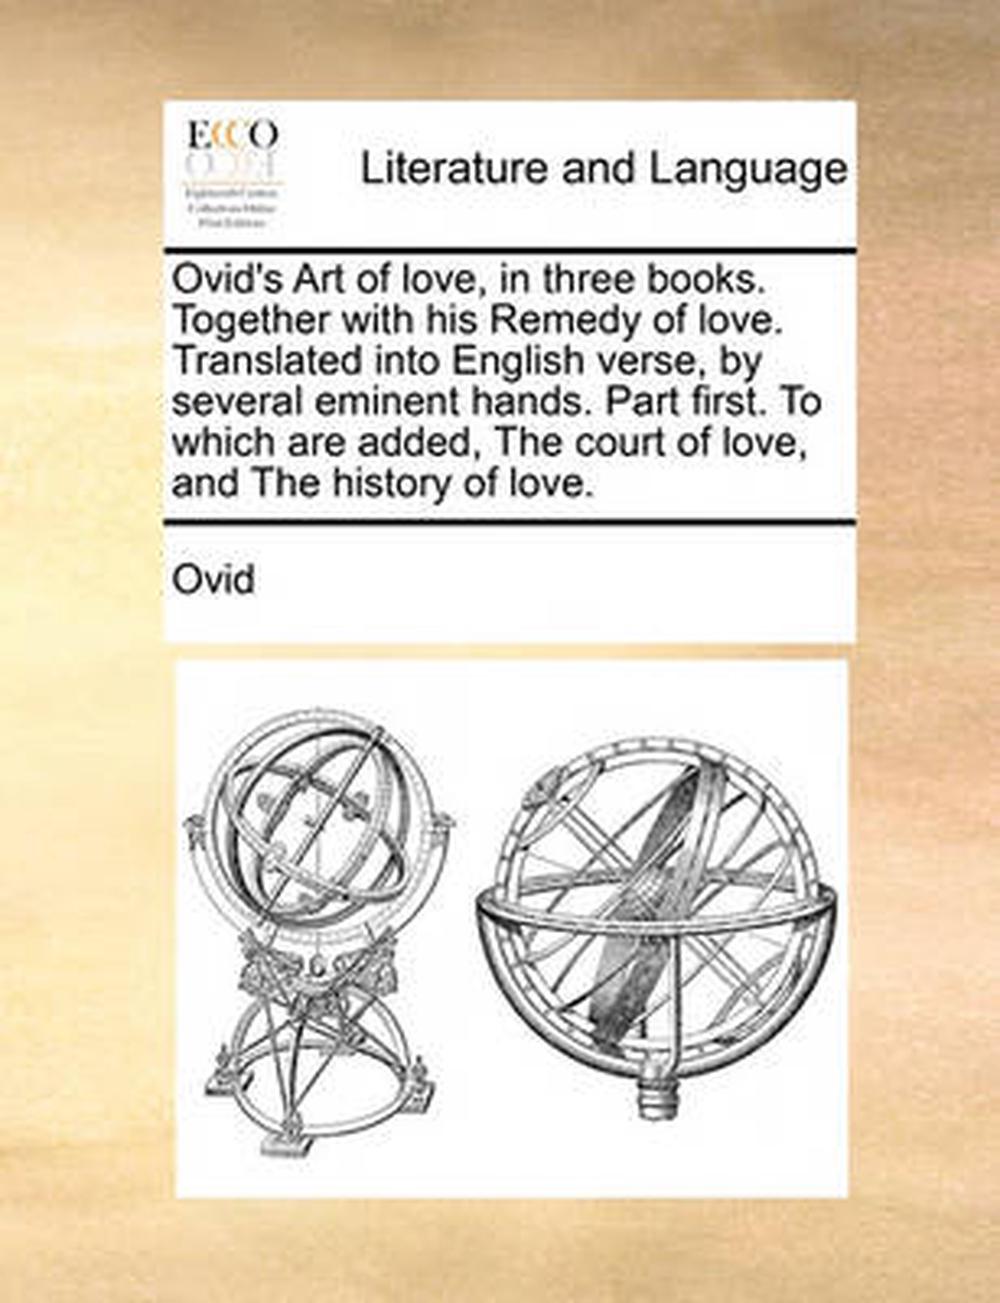 the art of love by ovid